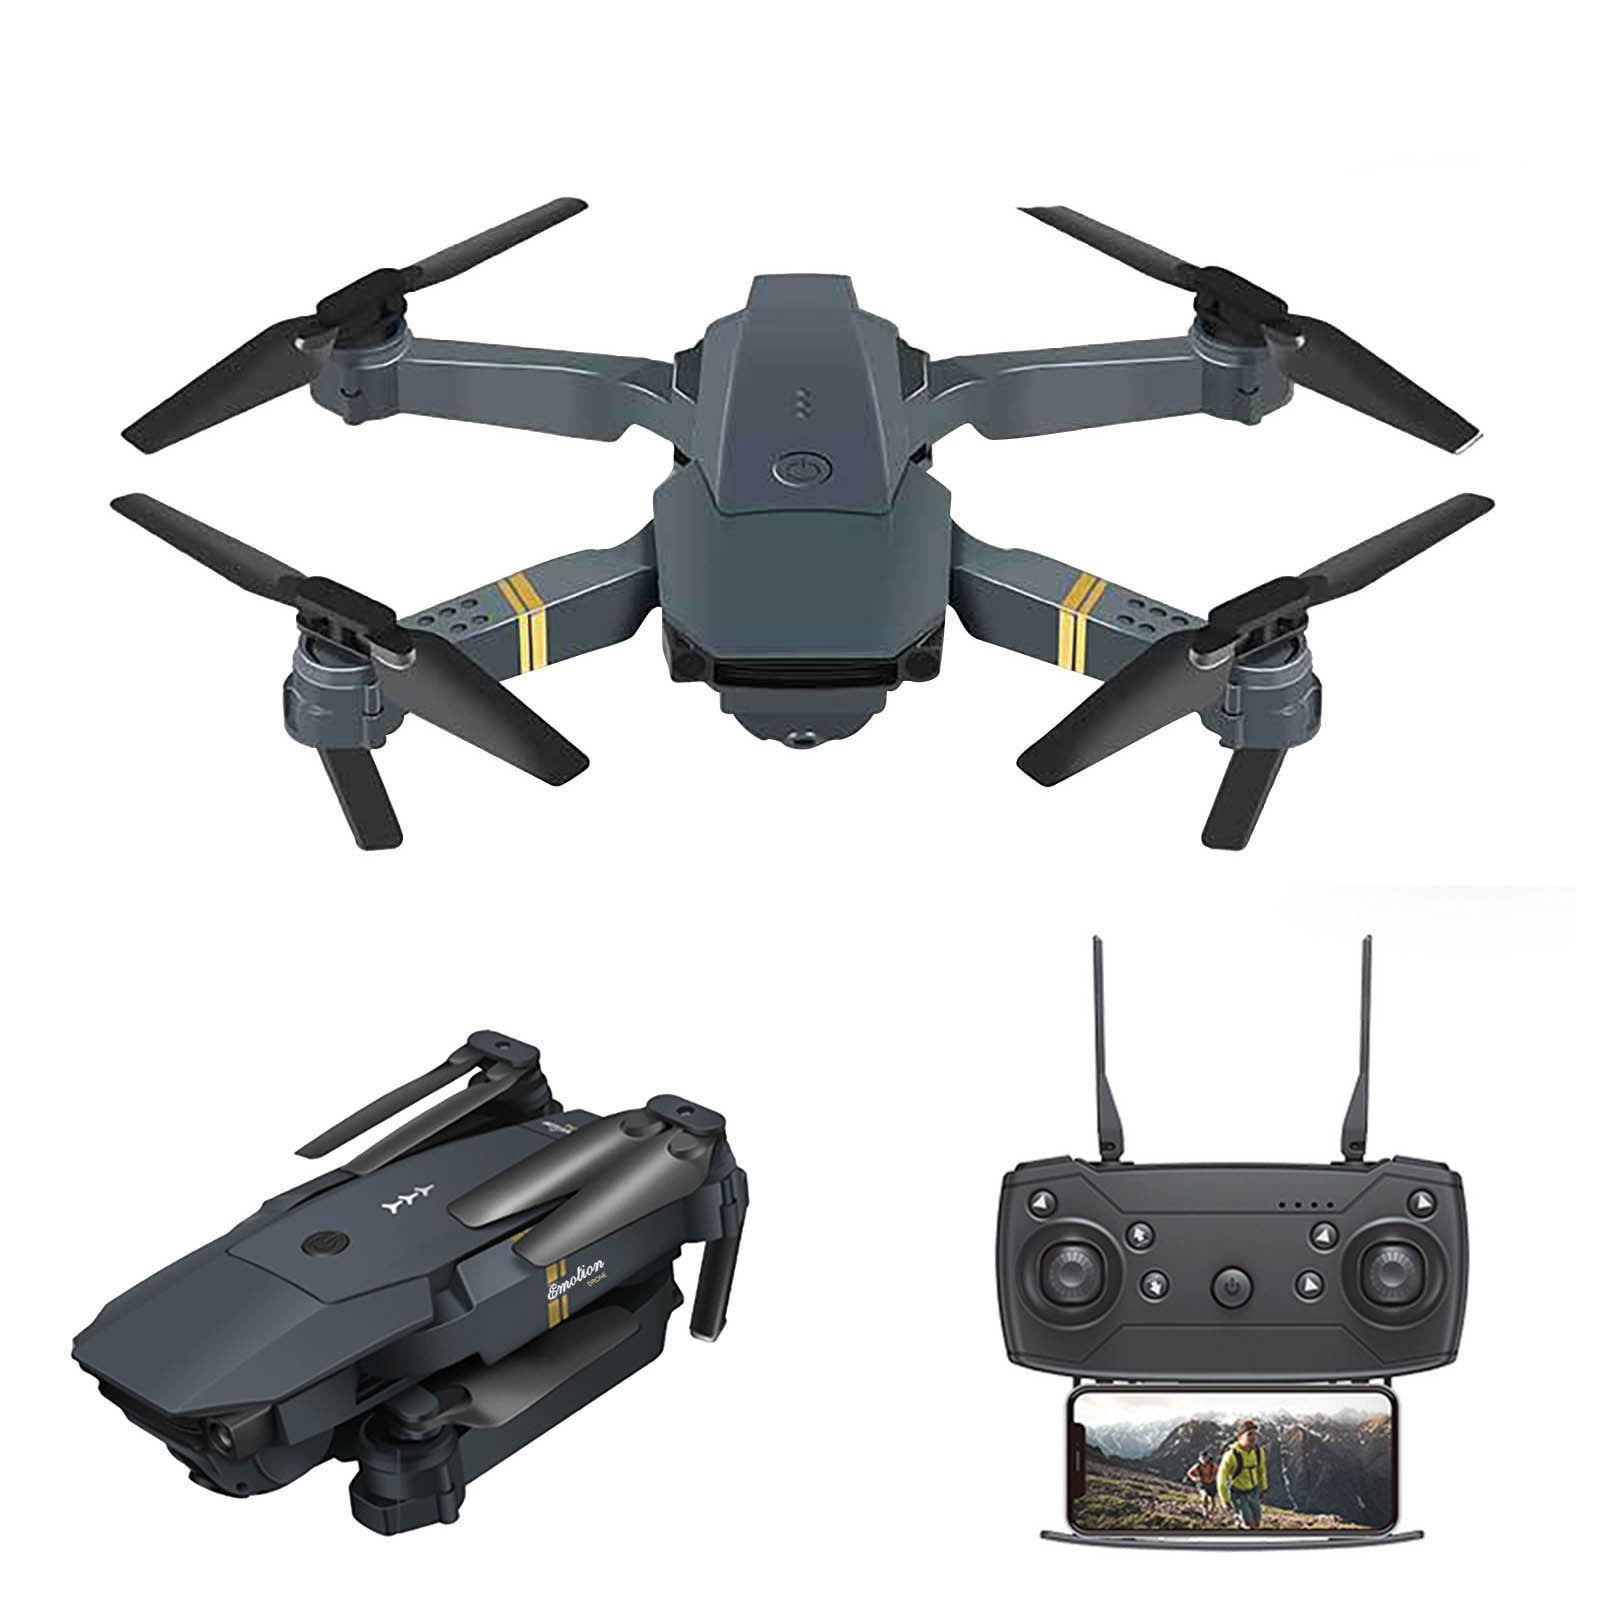 Drones with Camera for Adults Beginners Kids, Foldable E58 Drone with 1080P  HD Camera, RC Quadcopter - FPV Live Video, Altitude Hold, Headless Mode,  One Key Take Off/Landing, APP Control